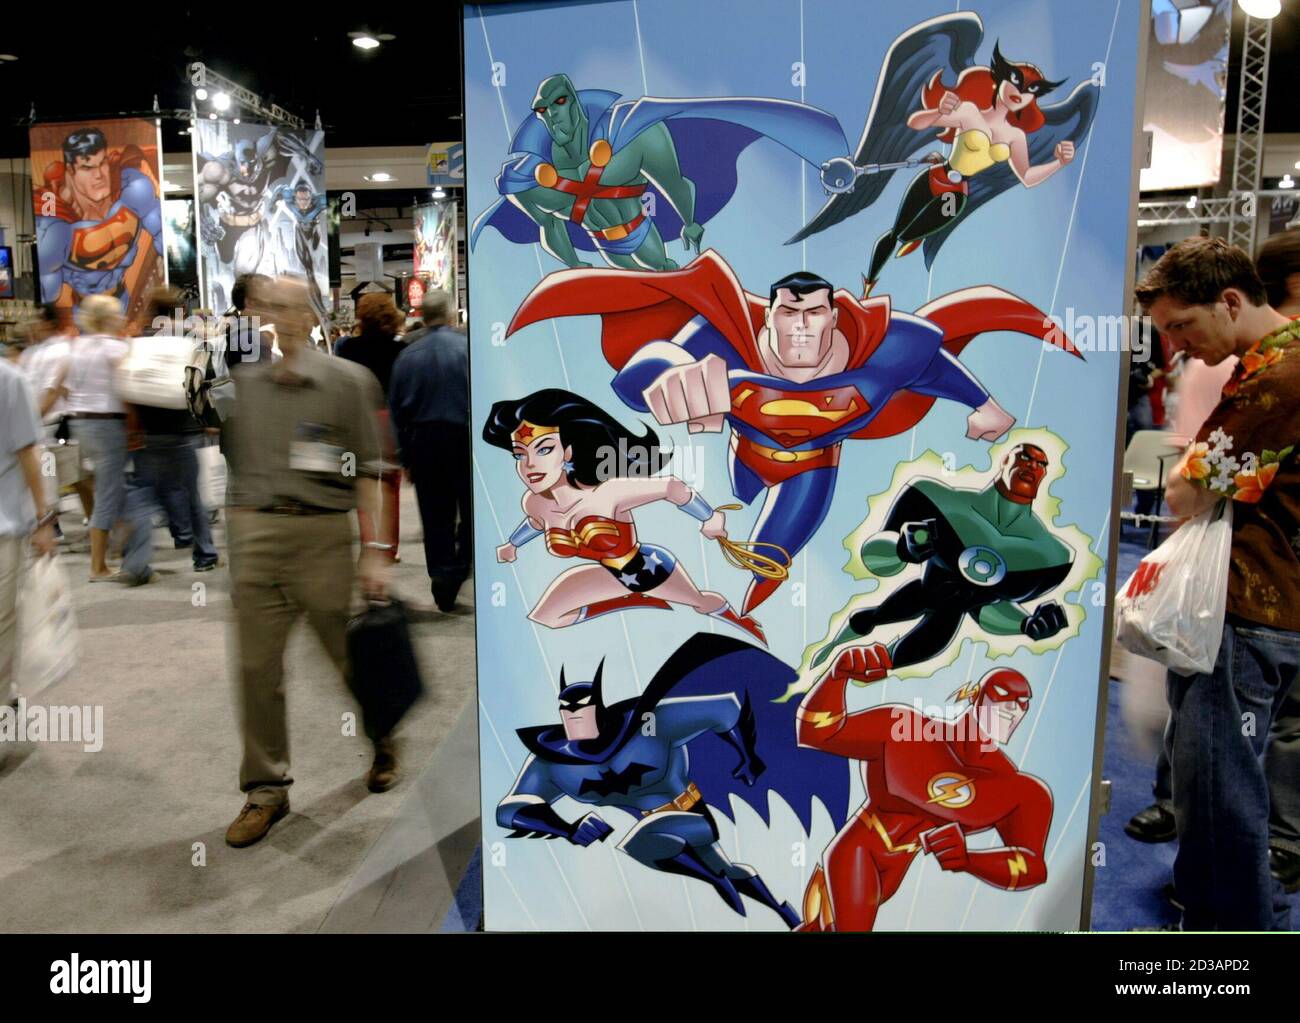 Animated action heros greet thousands of comic book fans from around the  world at the annual four-day Comic Con convention in San Diego, July 18,  2003. Thousands of fans from around the